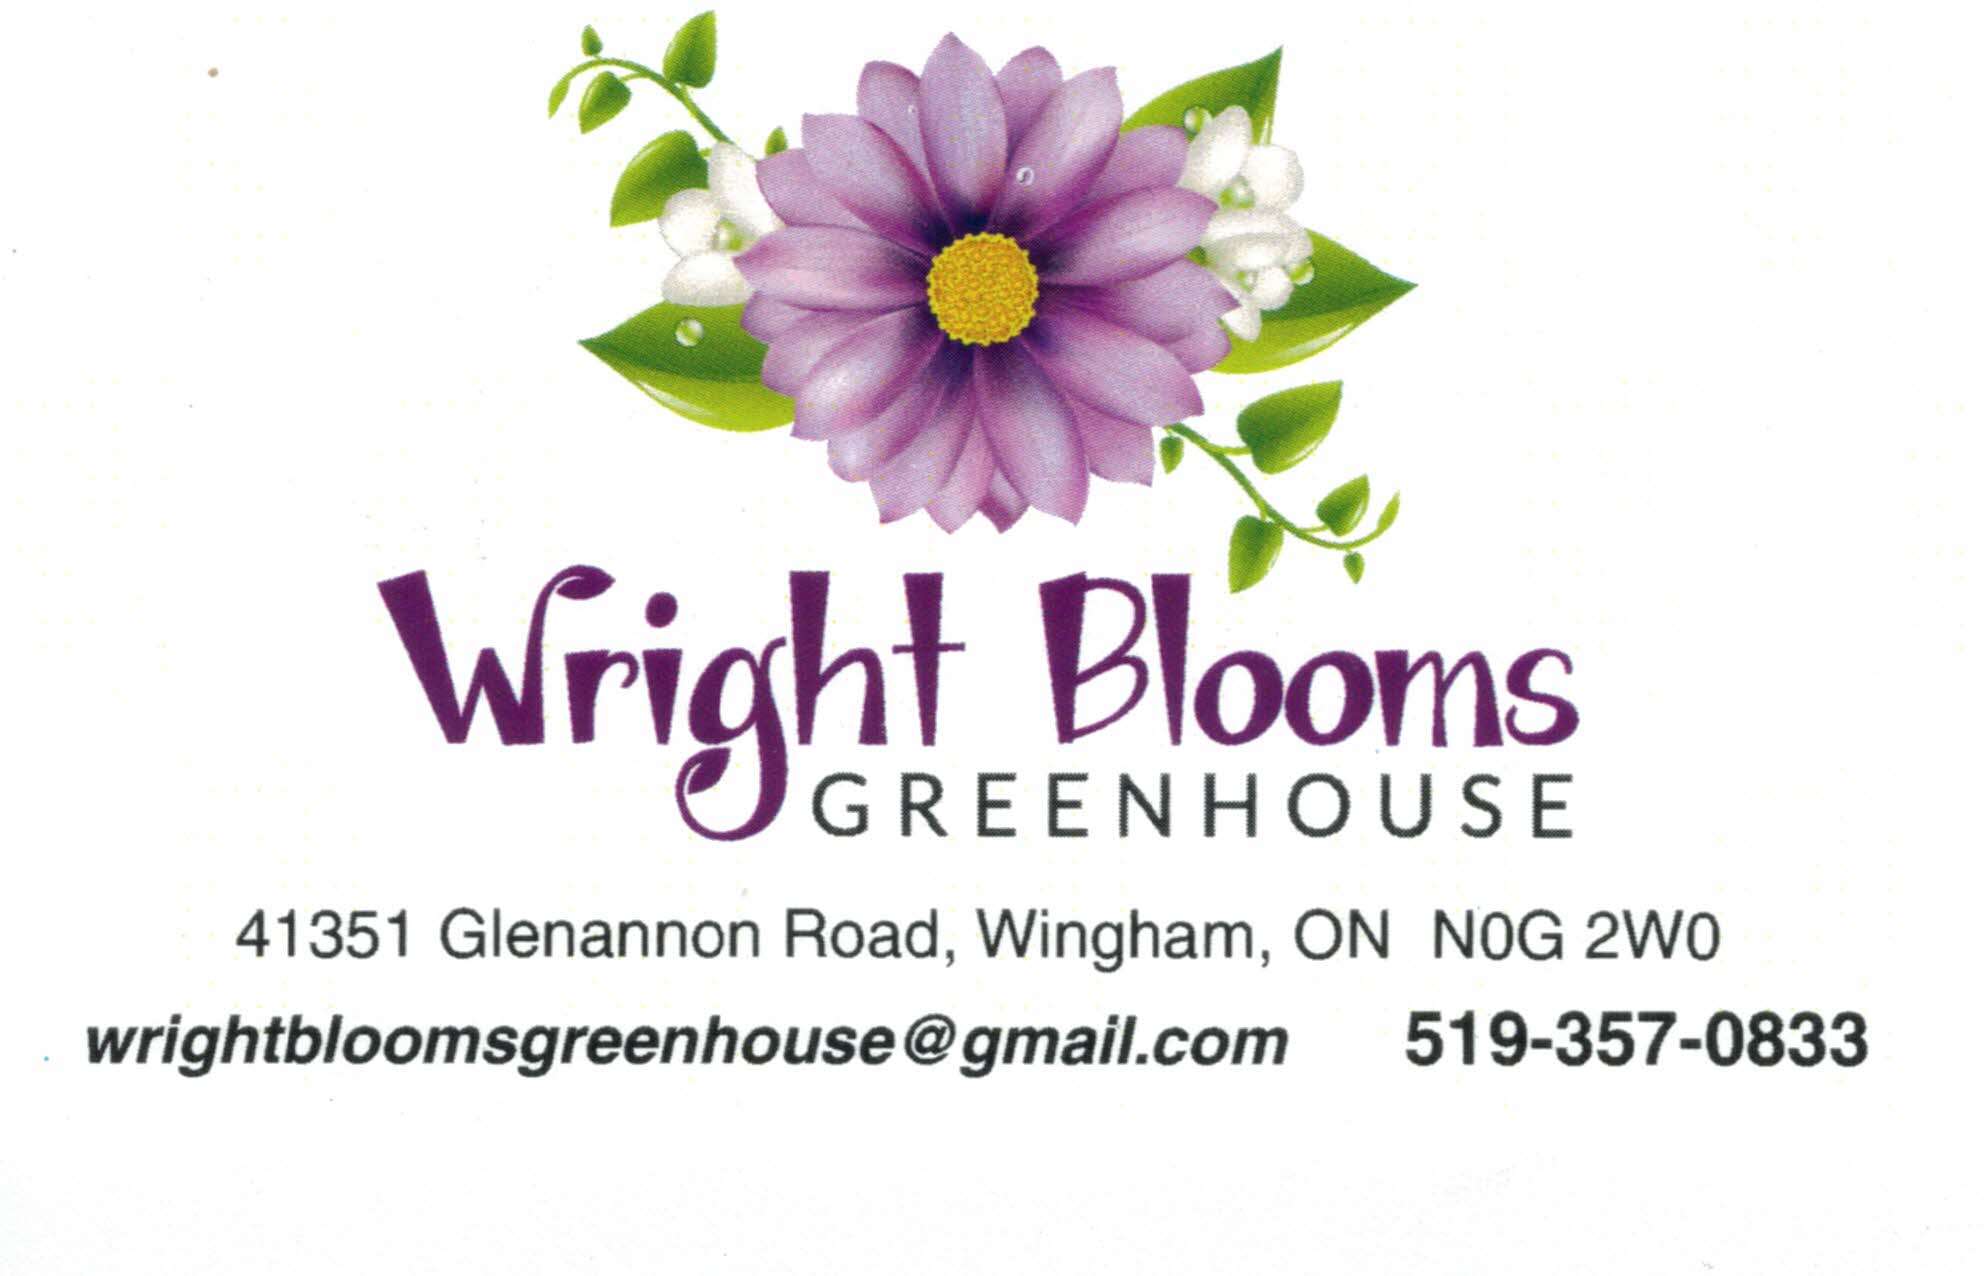 Wright Blooms Greenhouse